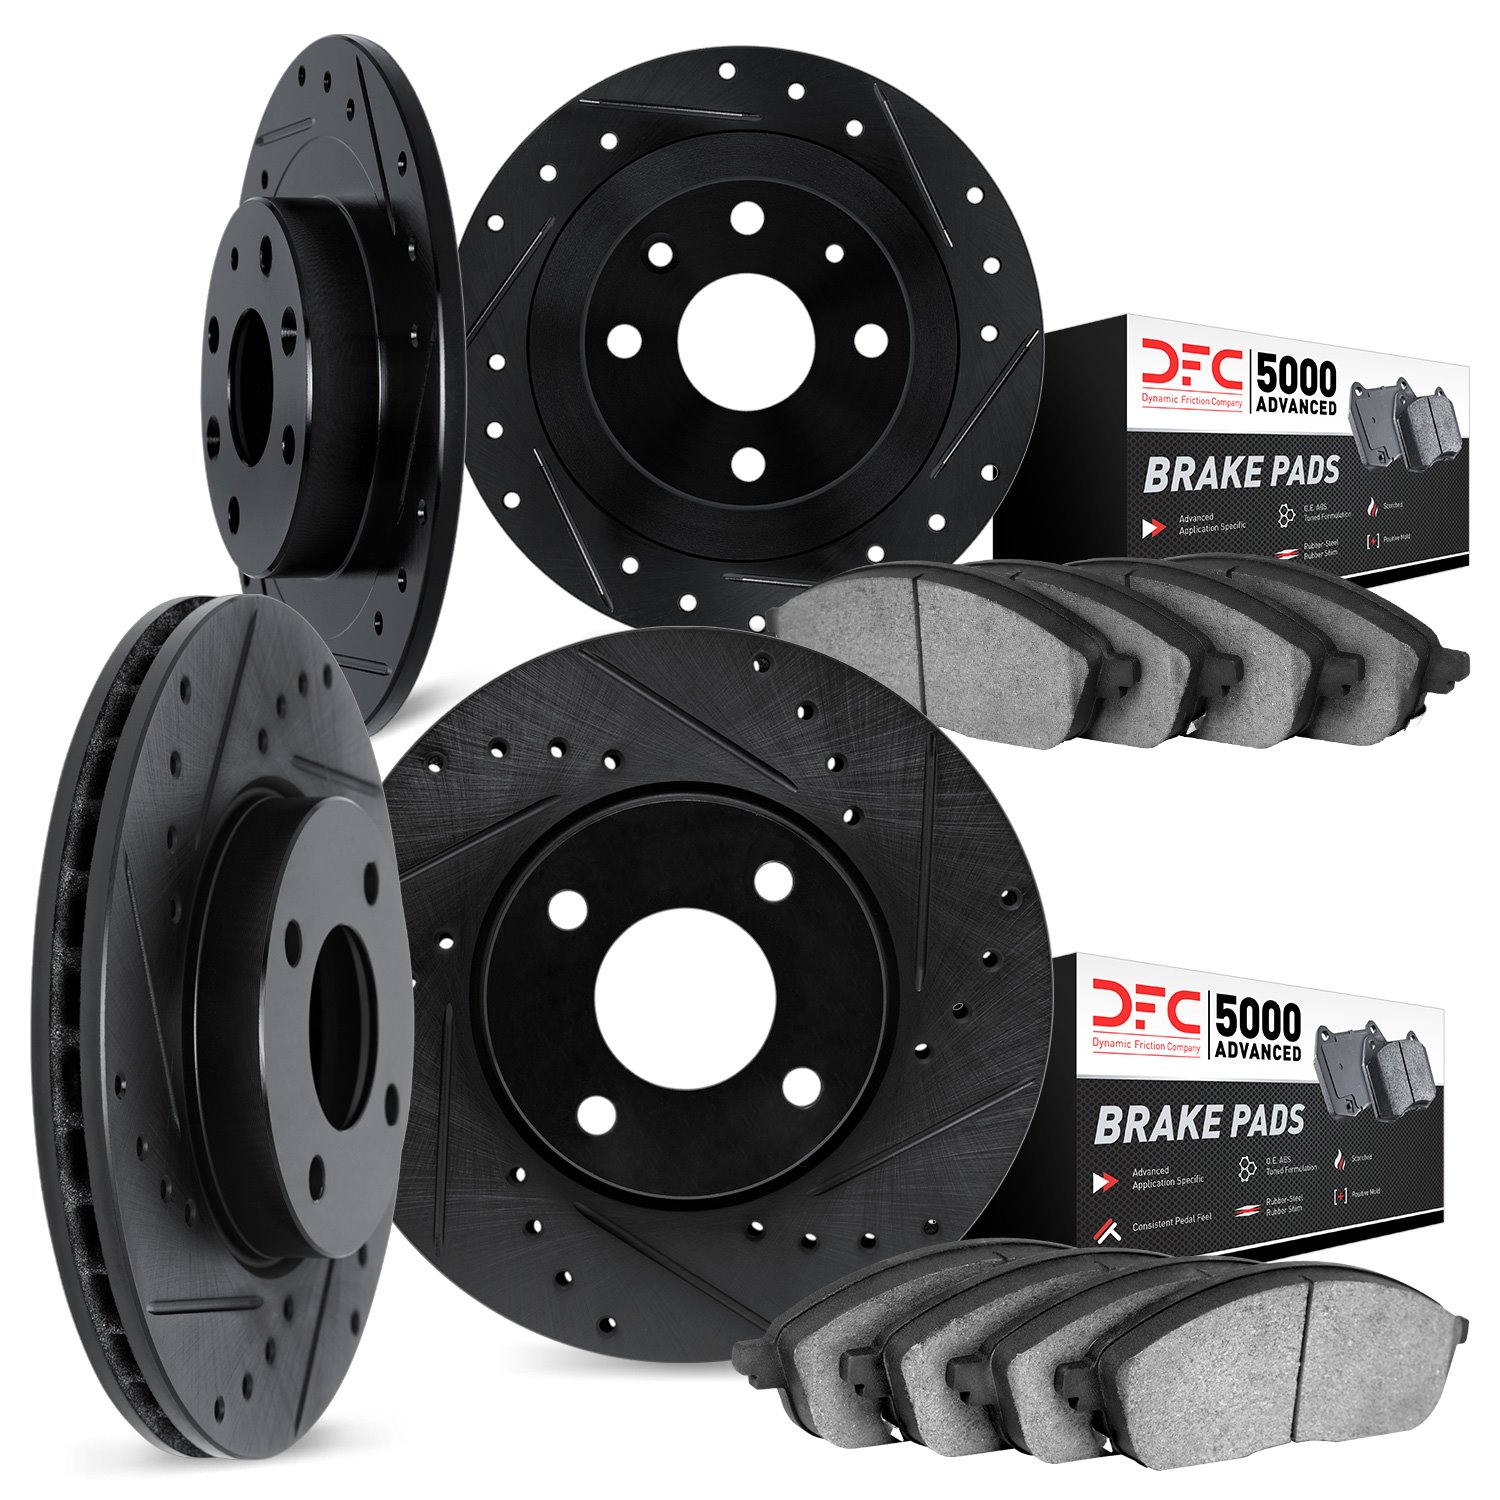 8504-37005 Drilled/Slotted Brake Rotors w/5000 Advanced Brake Pads Kit [Black], 1989-1993 GM, Position: Front and Rear